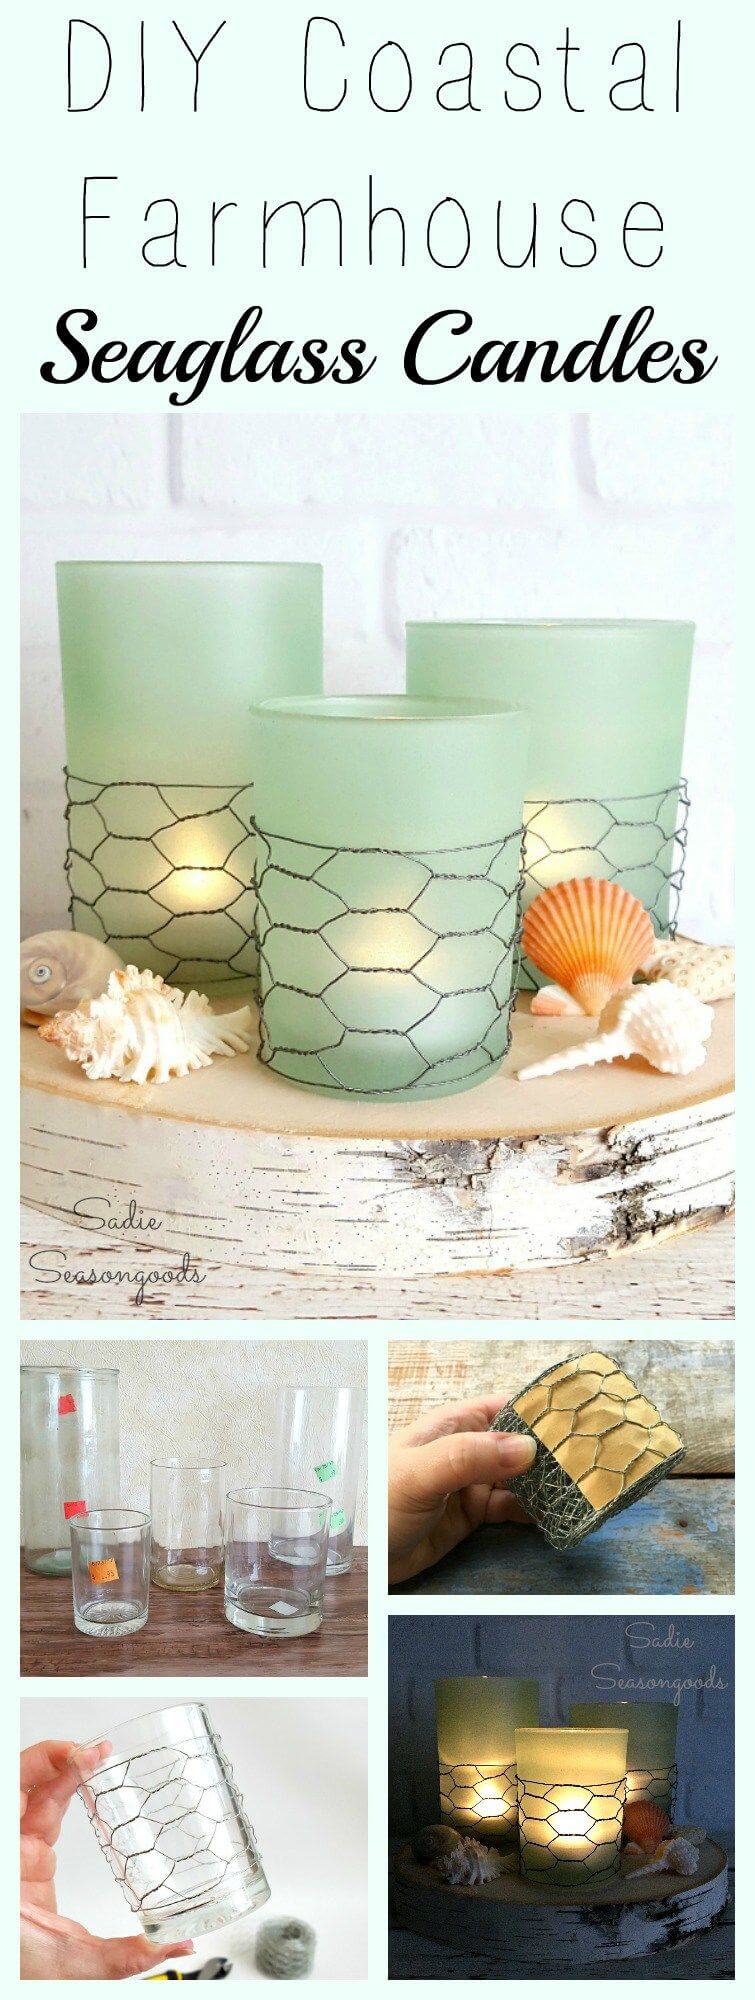 DIY home decoratin and Crafts ideas with Chicken Wire